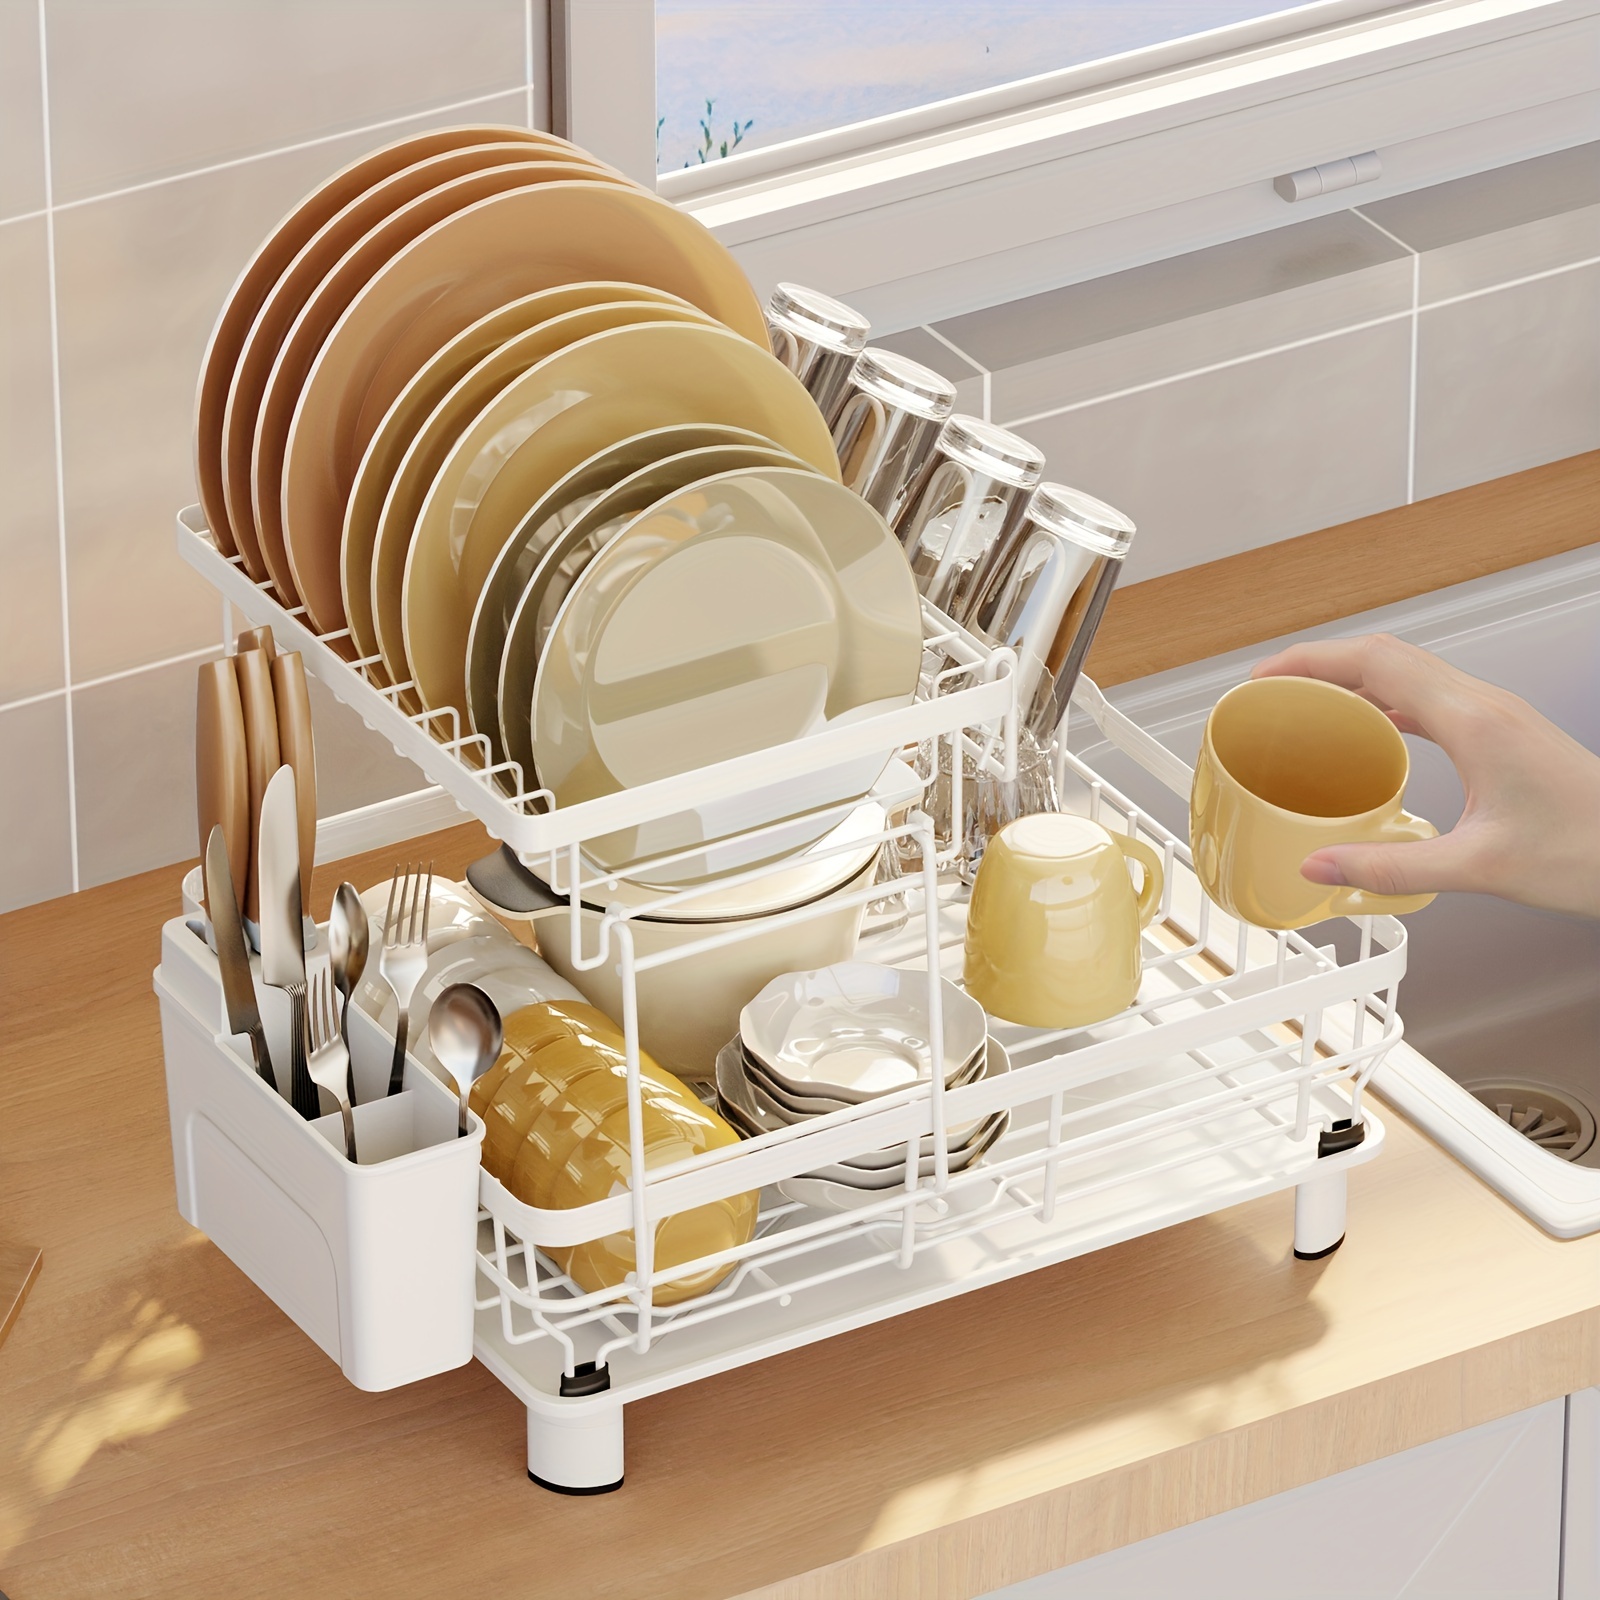  Dish Drying Rack for Kitchen Counter - 2 Tier Large Dish Rack  with Drainboard, Rustproof Dish Drainer with Utensil Holder for Sink, White